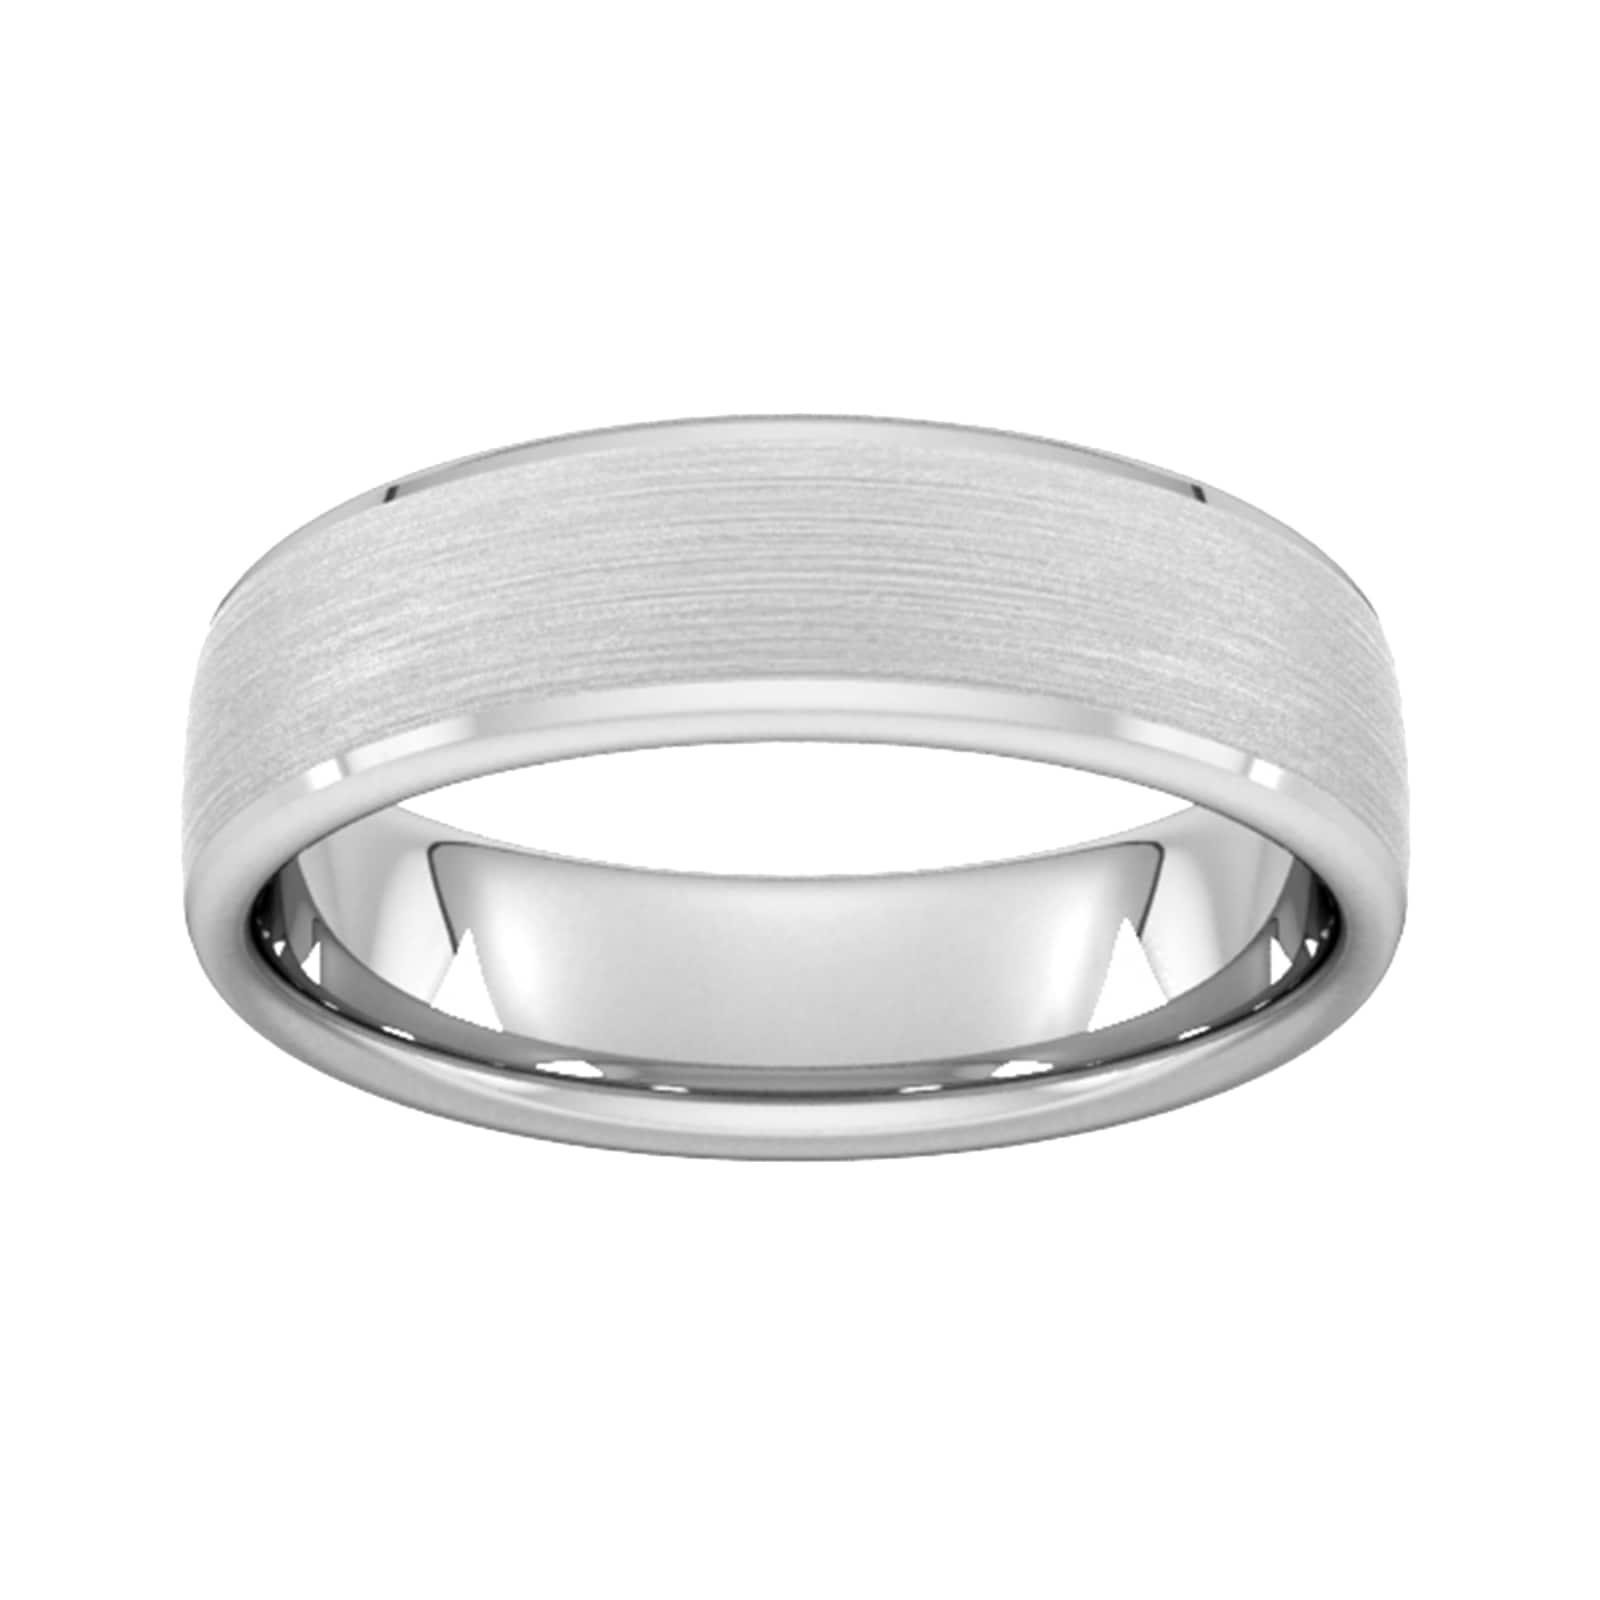 6mm Slight Court Heavy Polished Chamfered Edges With Matt Centre Wedding Ring In 950 Palladium - Ring Size Q